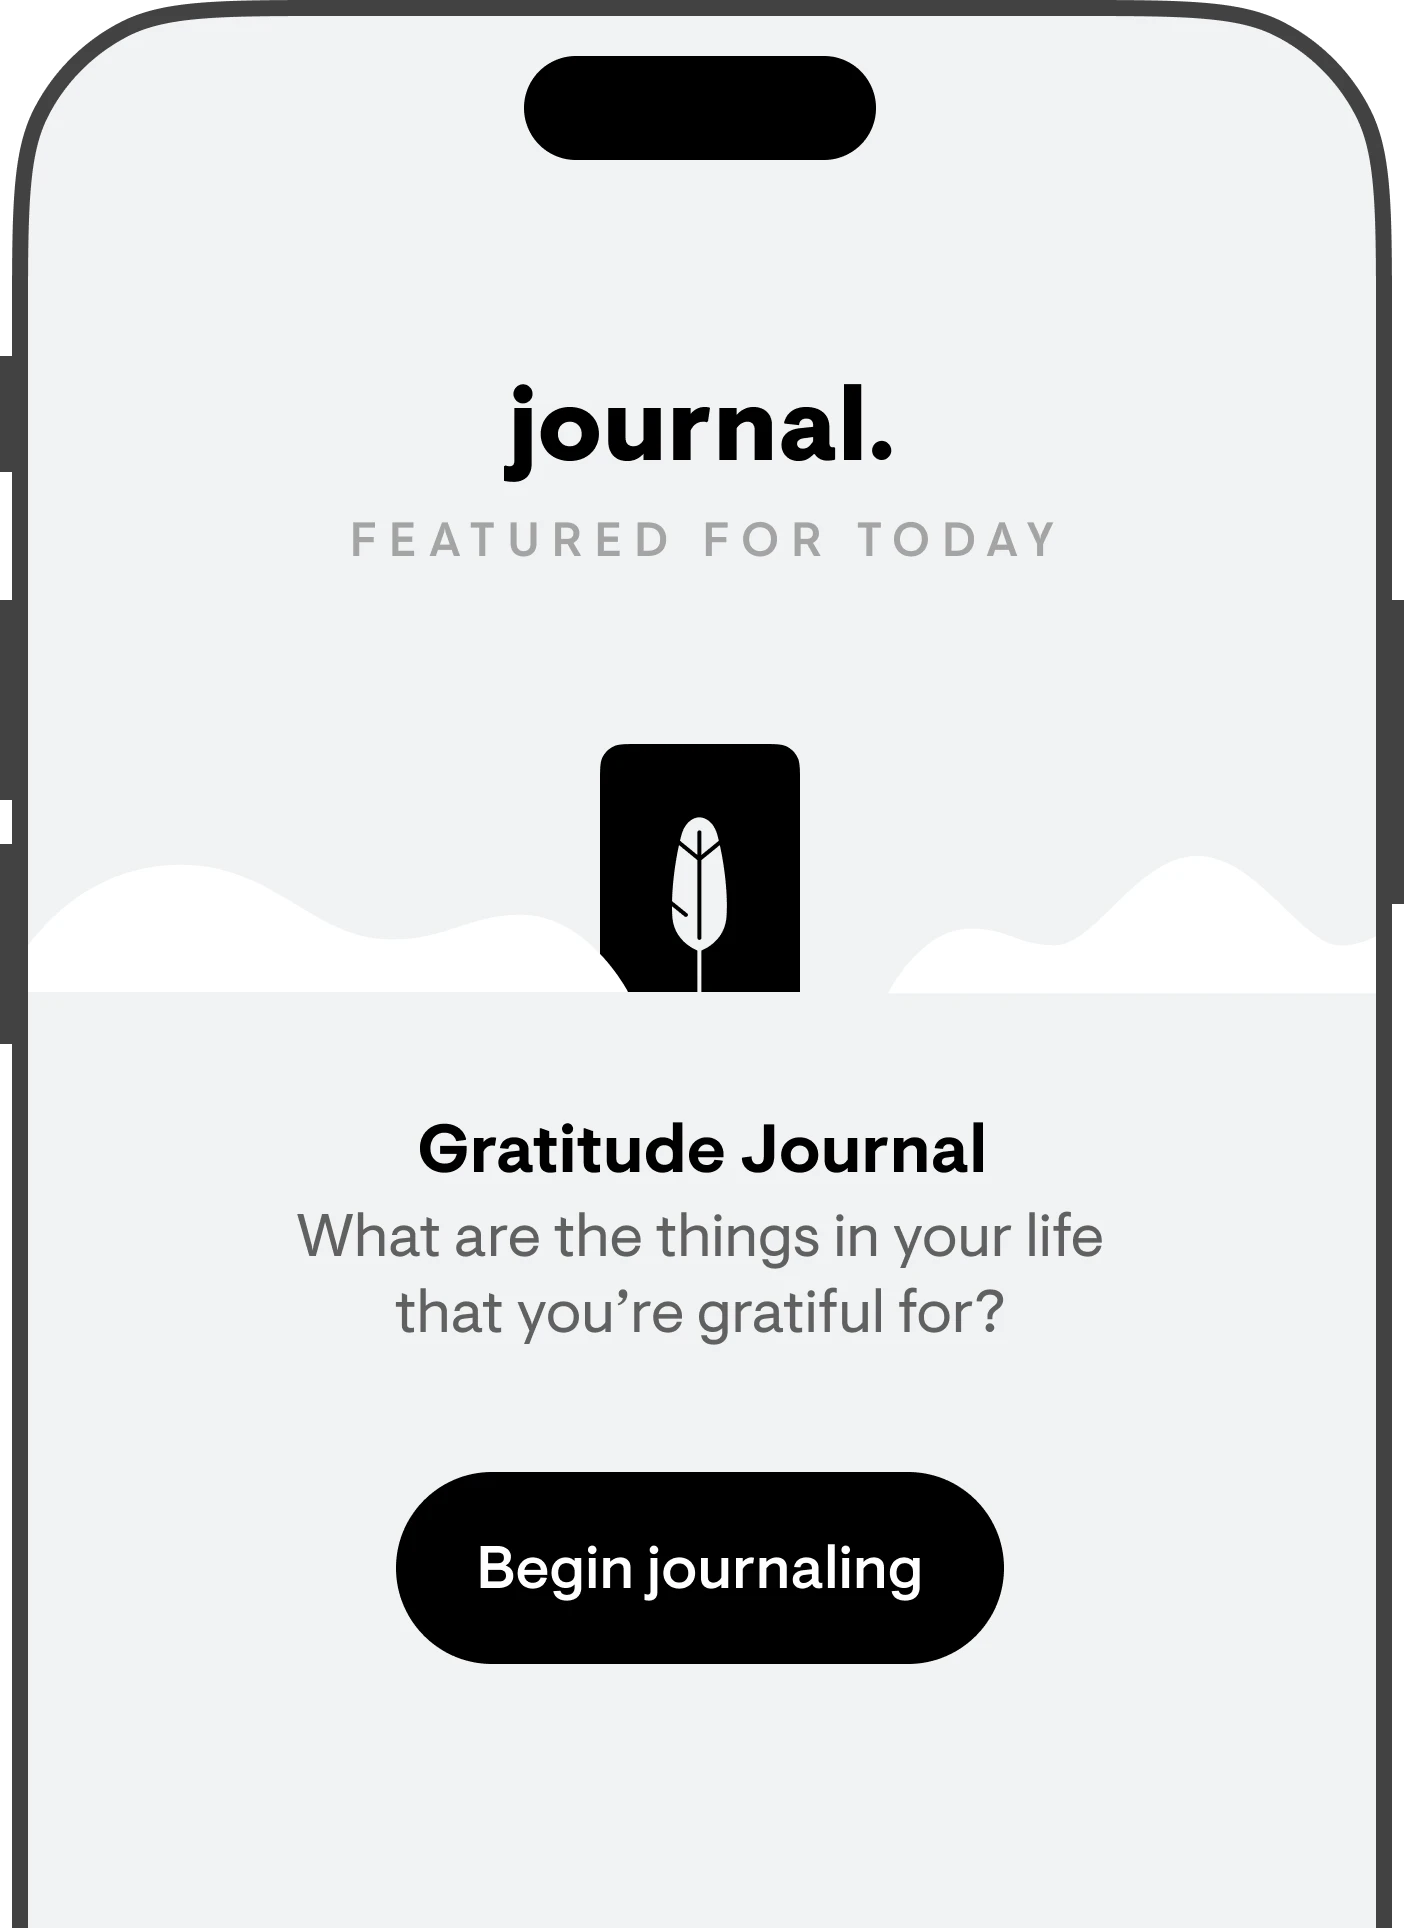 A screenshot of the stoic mental health app's guided journaling tab with a description for a gratitude journal.